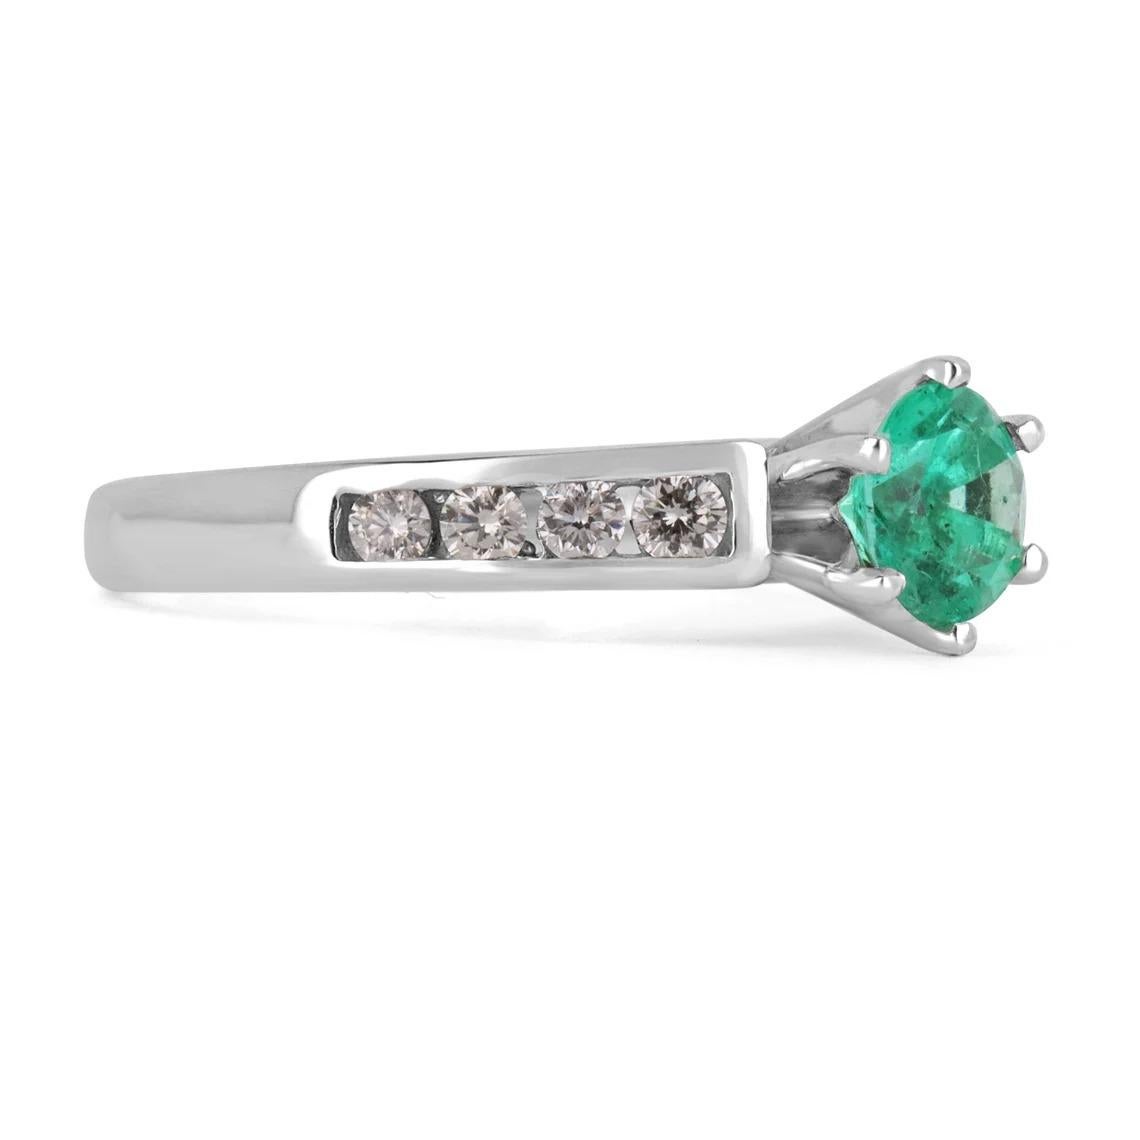 Showcased are a vivacious round genuine emerald and round diamond ring that is sure to set her heart fluttering! Crafted in 14K white gold, this ring features a breathtaking emerald that weighs approximate 0.70-carats and is set in a six-prong